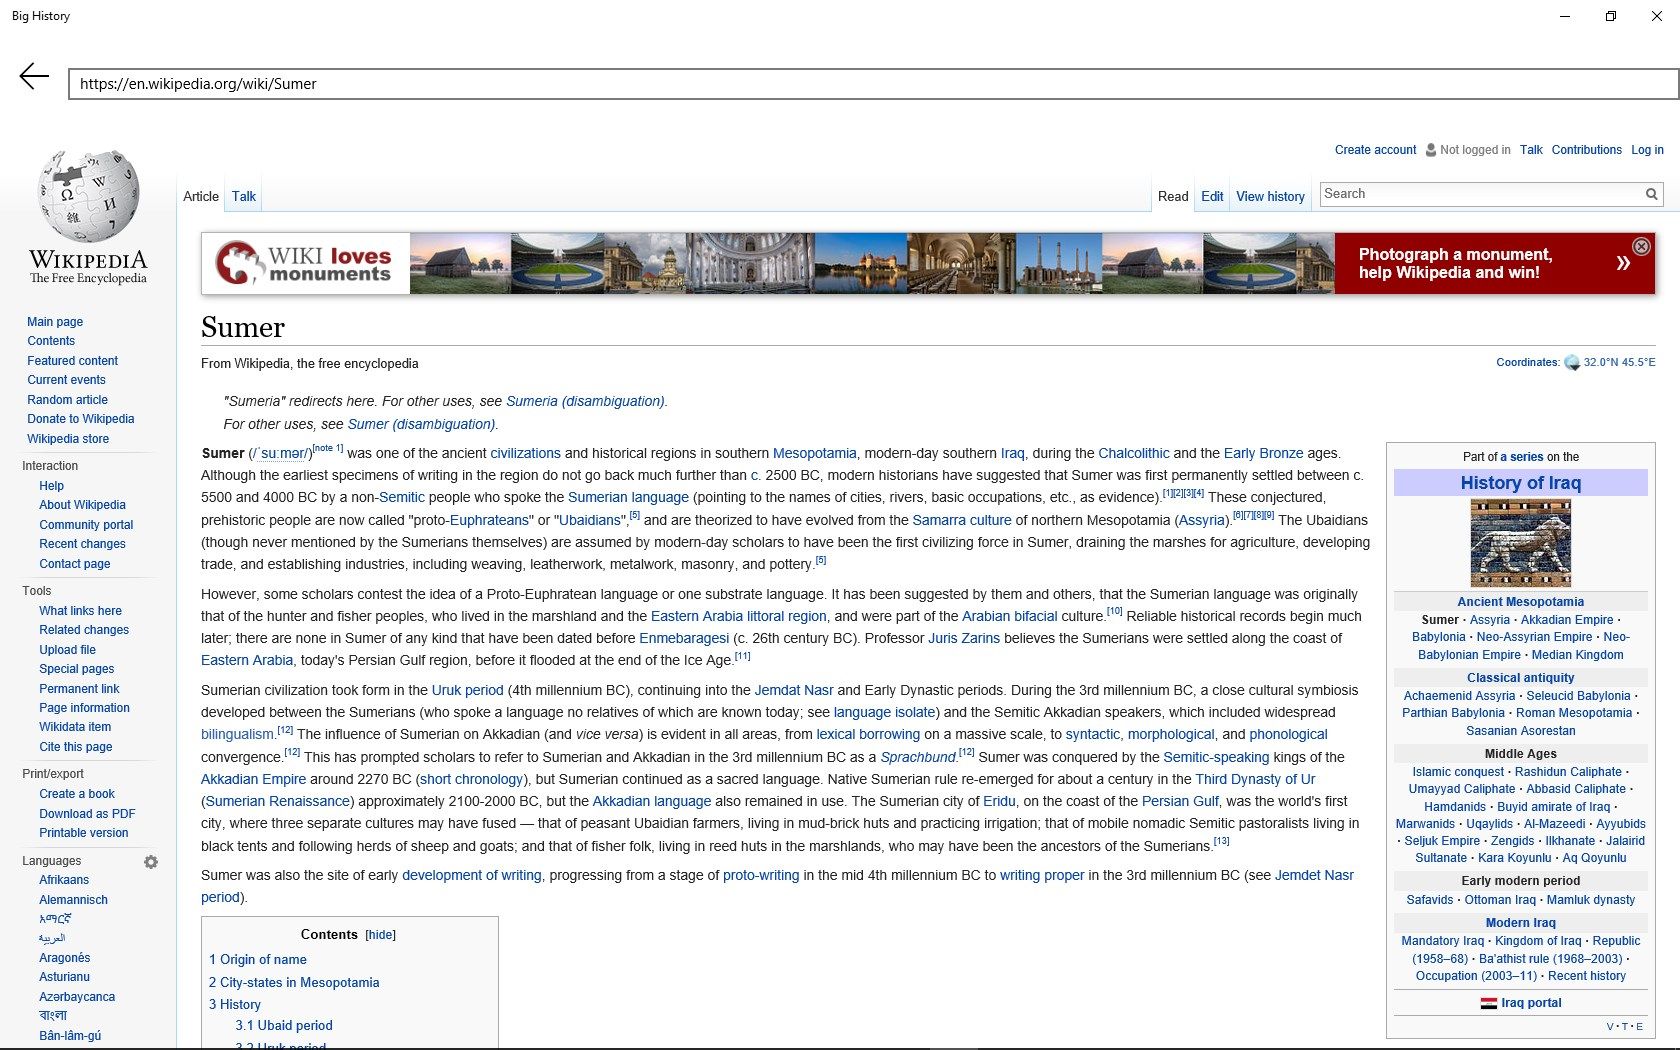 Wikipedia entry is available for each history event